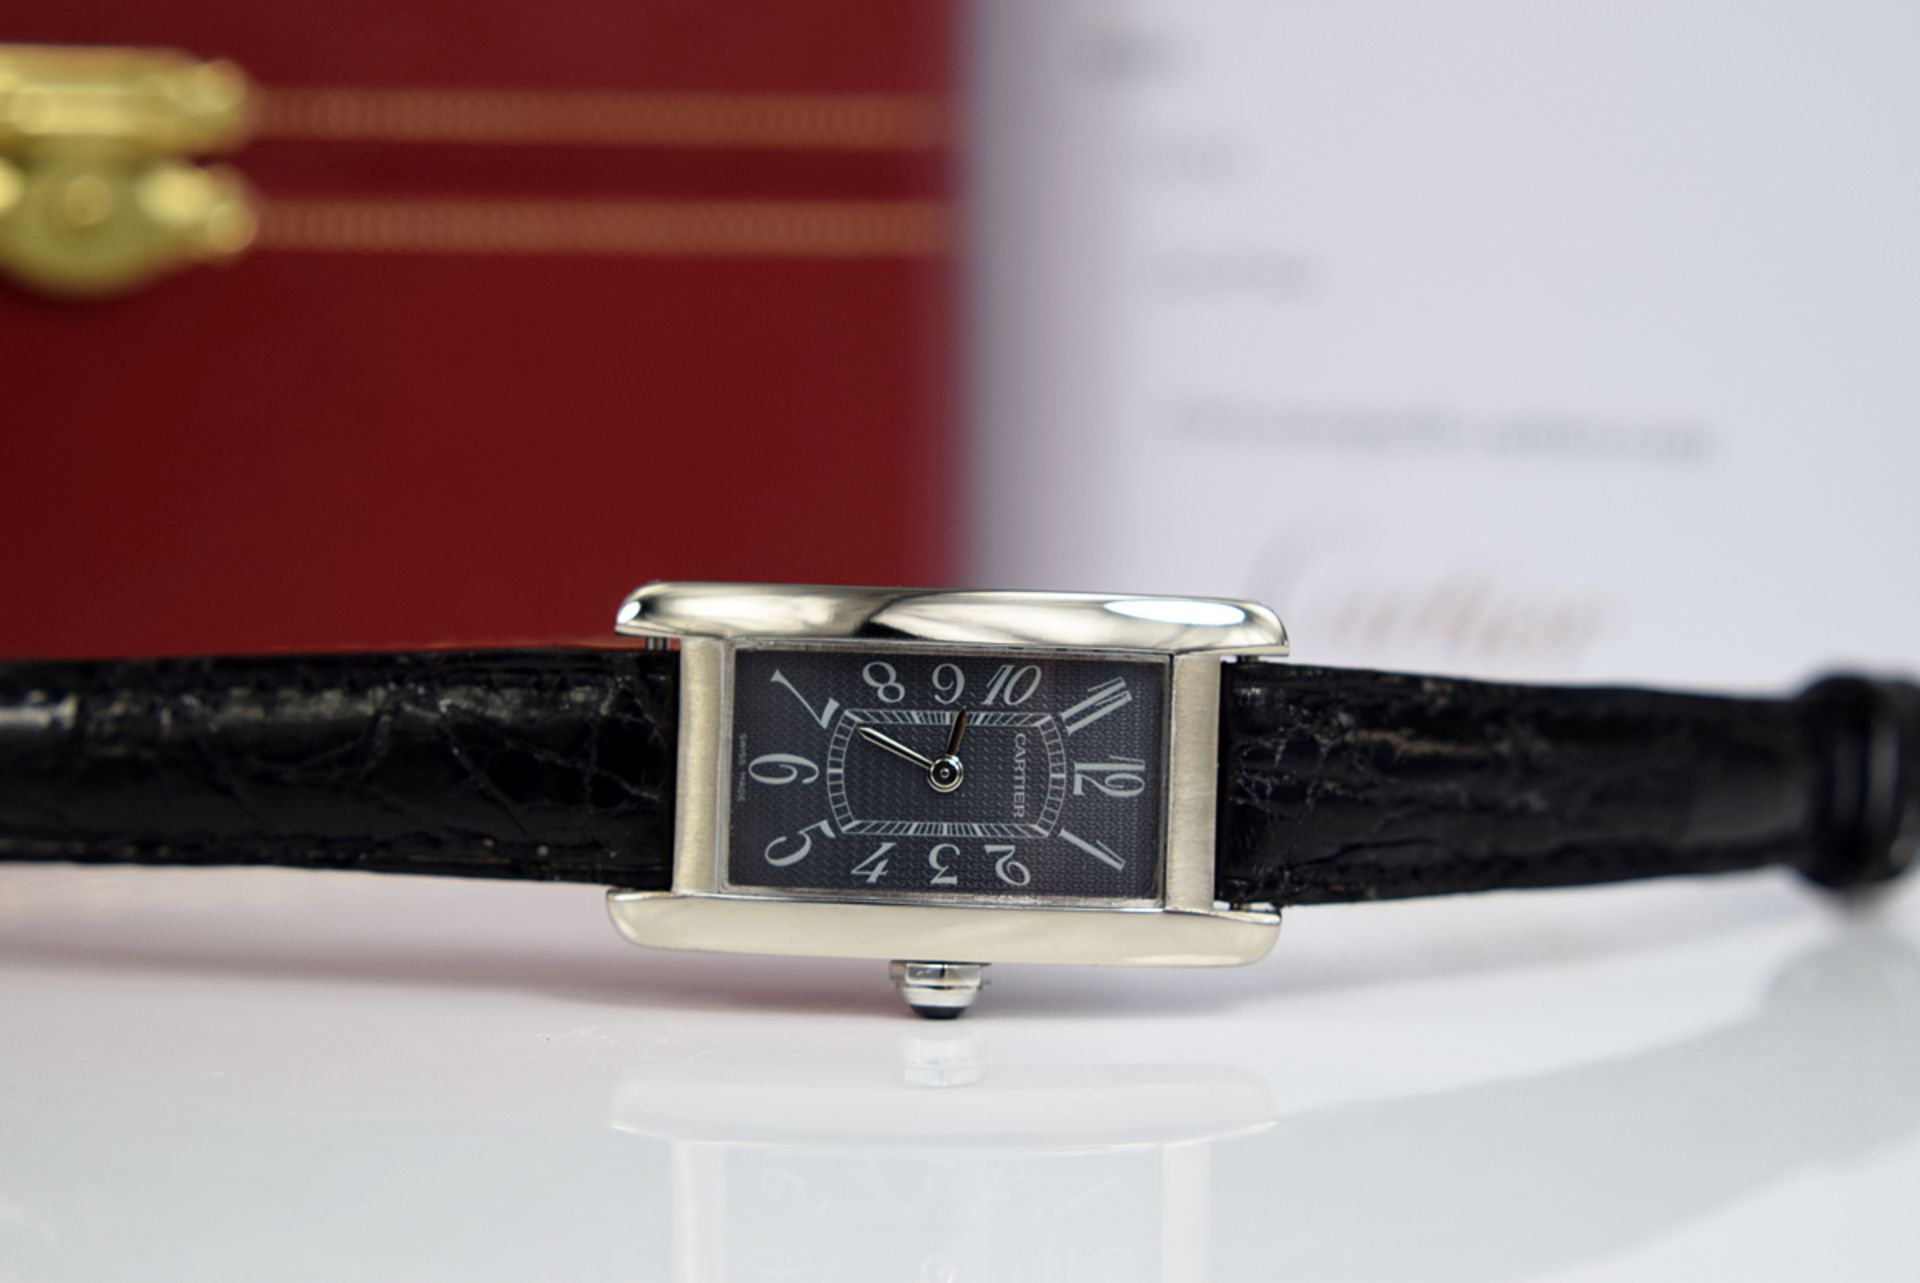 CARTIER 'AMERICAINE' 1713 WG - 18K WHITE GOLD *RARE* GREY DIAL! - Image 7 of 11